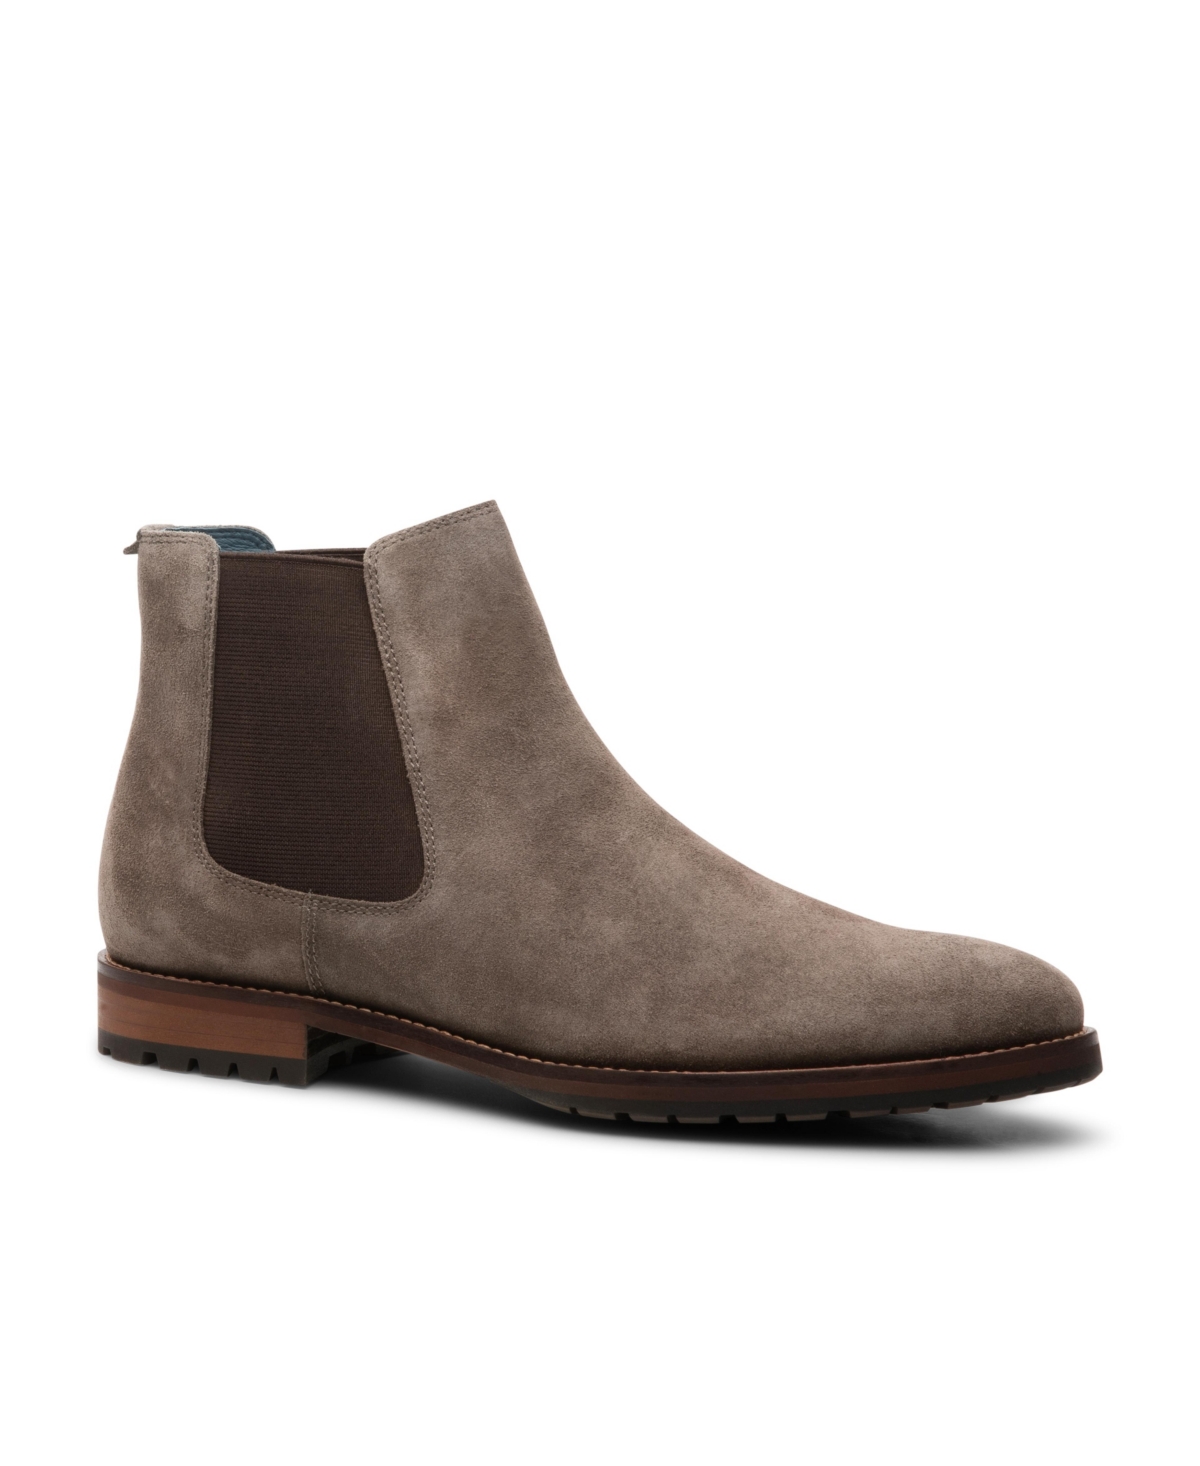 Men's Davidson Fashion Dress Casual Chelsea Boots - Taupe suede